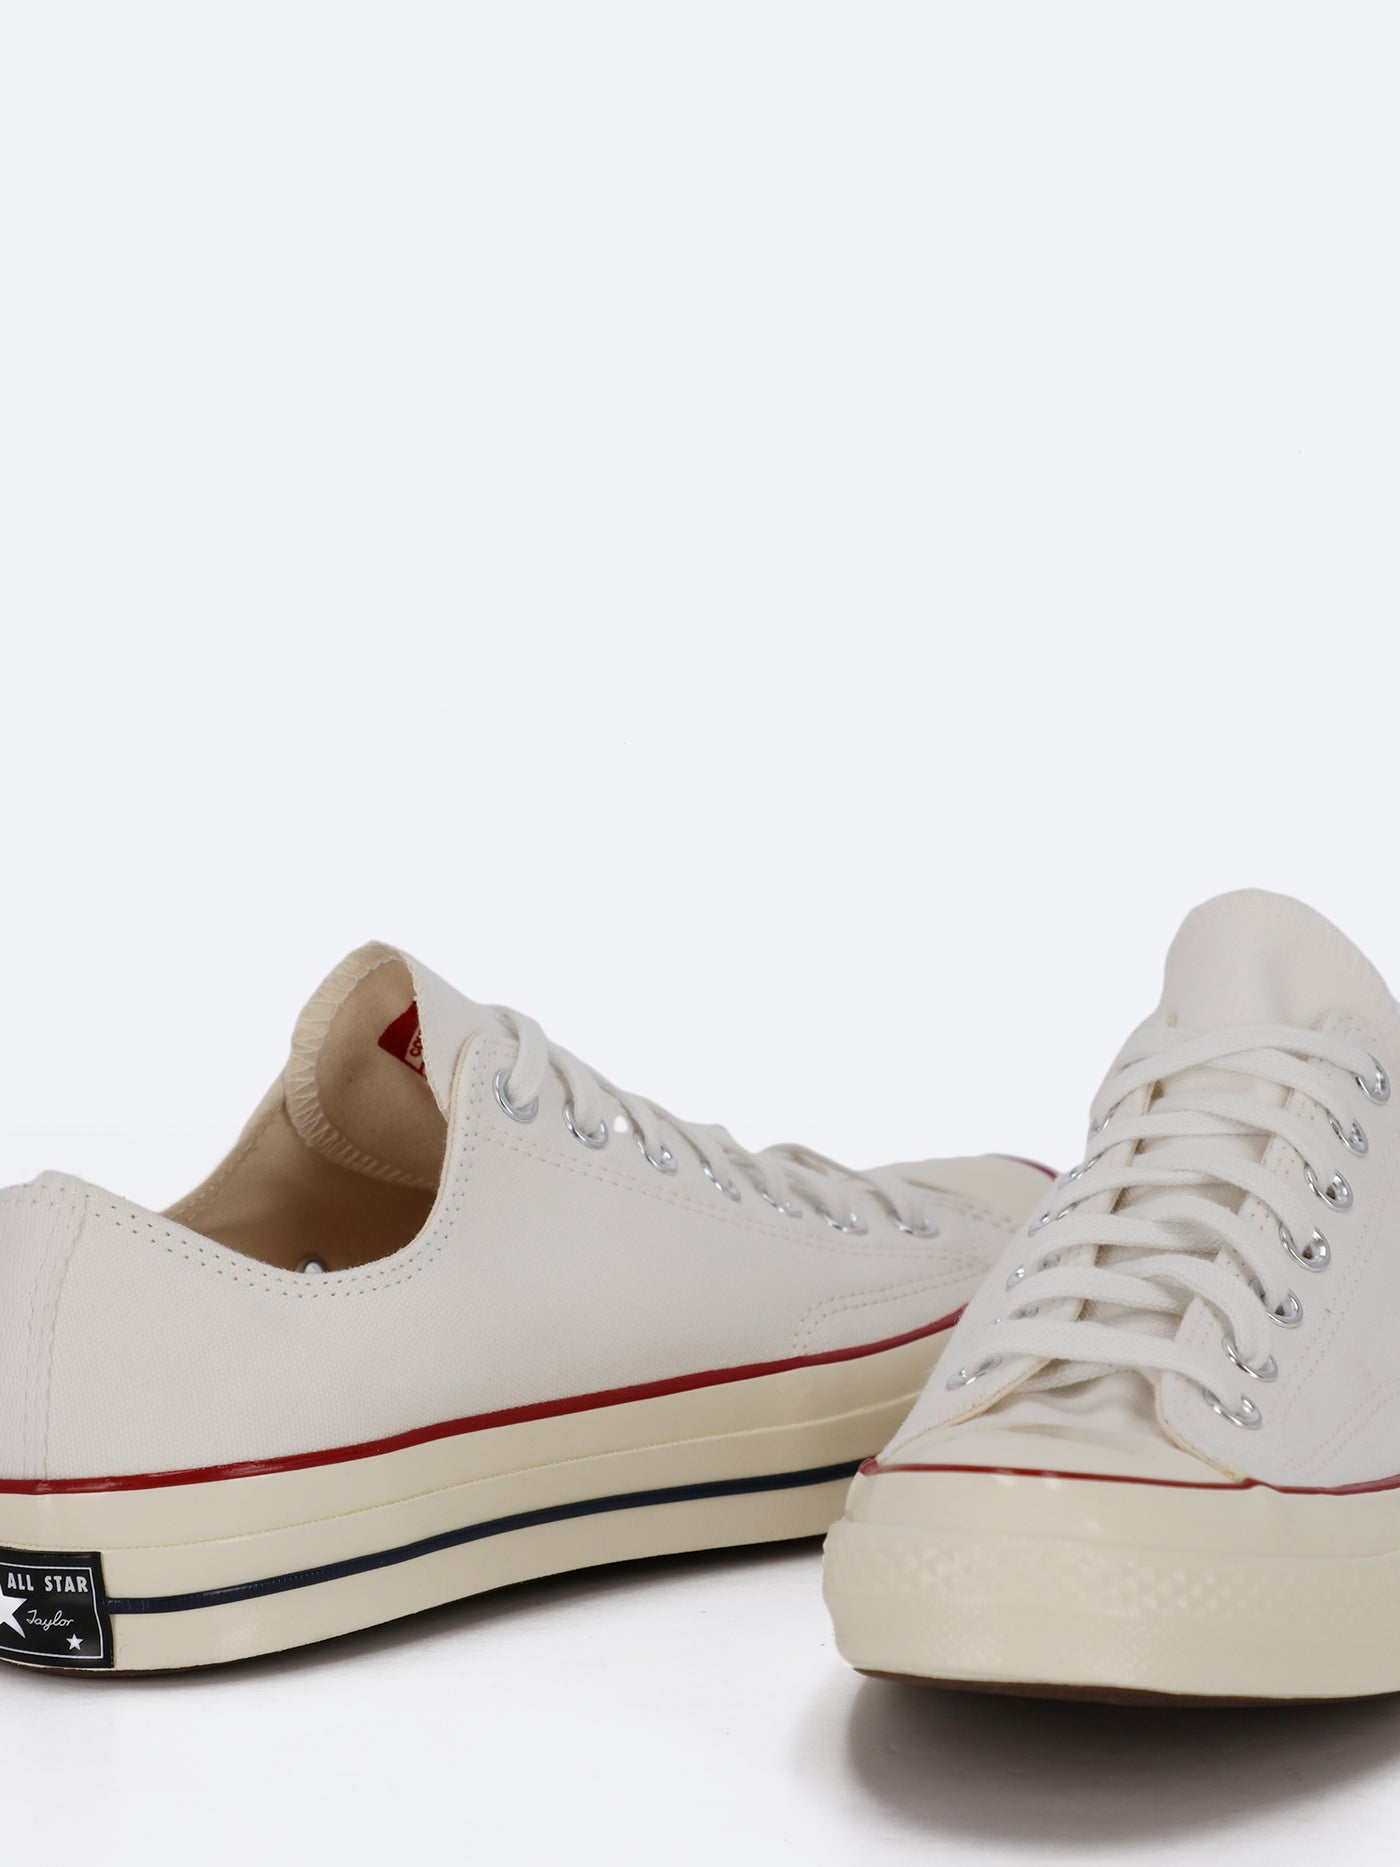 Chuck 70 Classic Low Top Unisex Sneakers